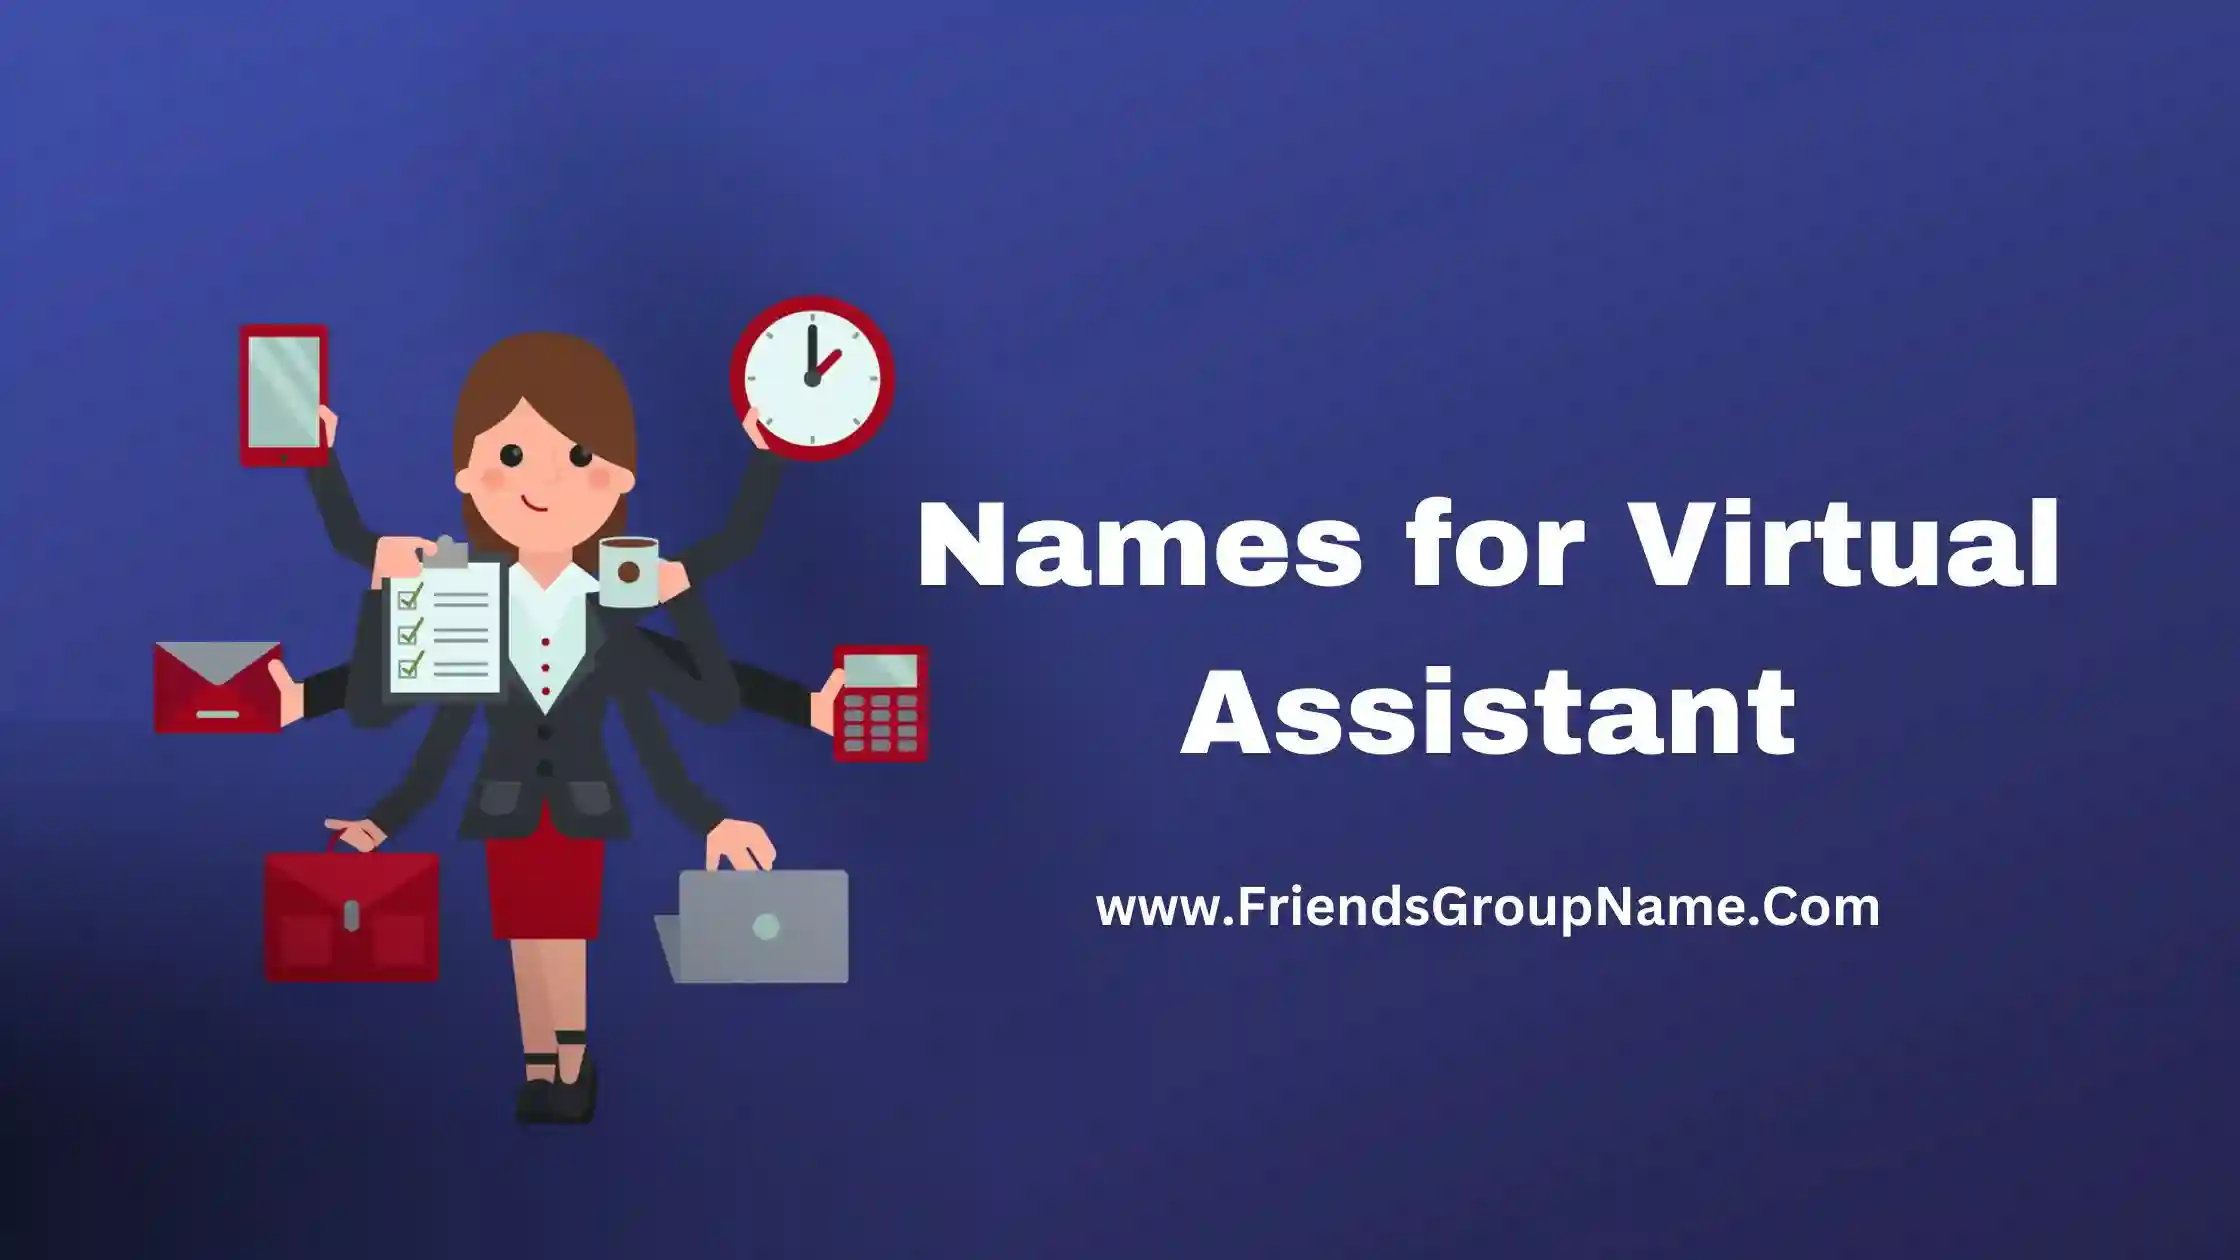 Names for Virtual Assistant